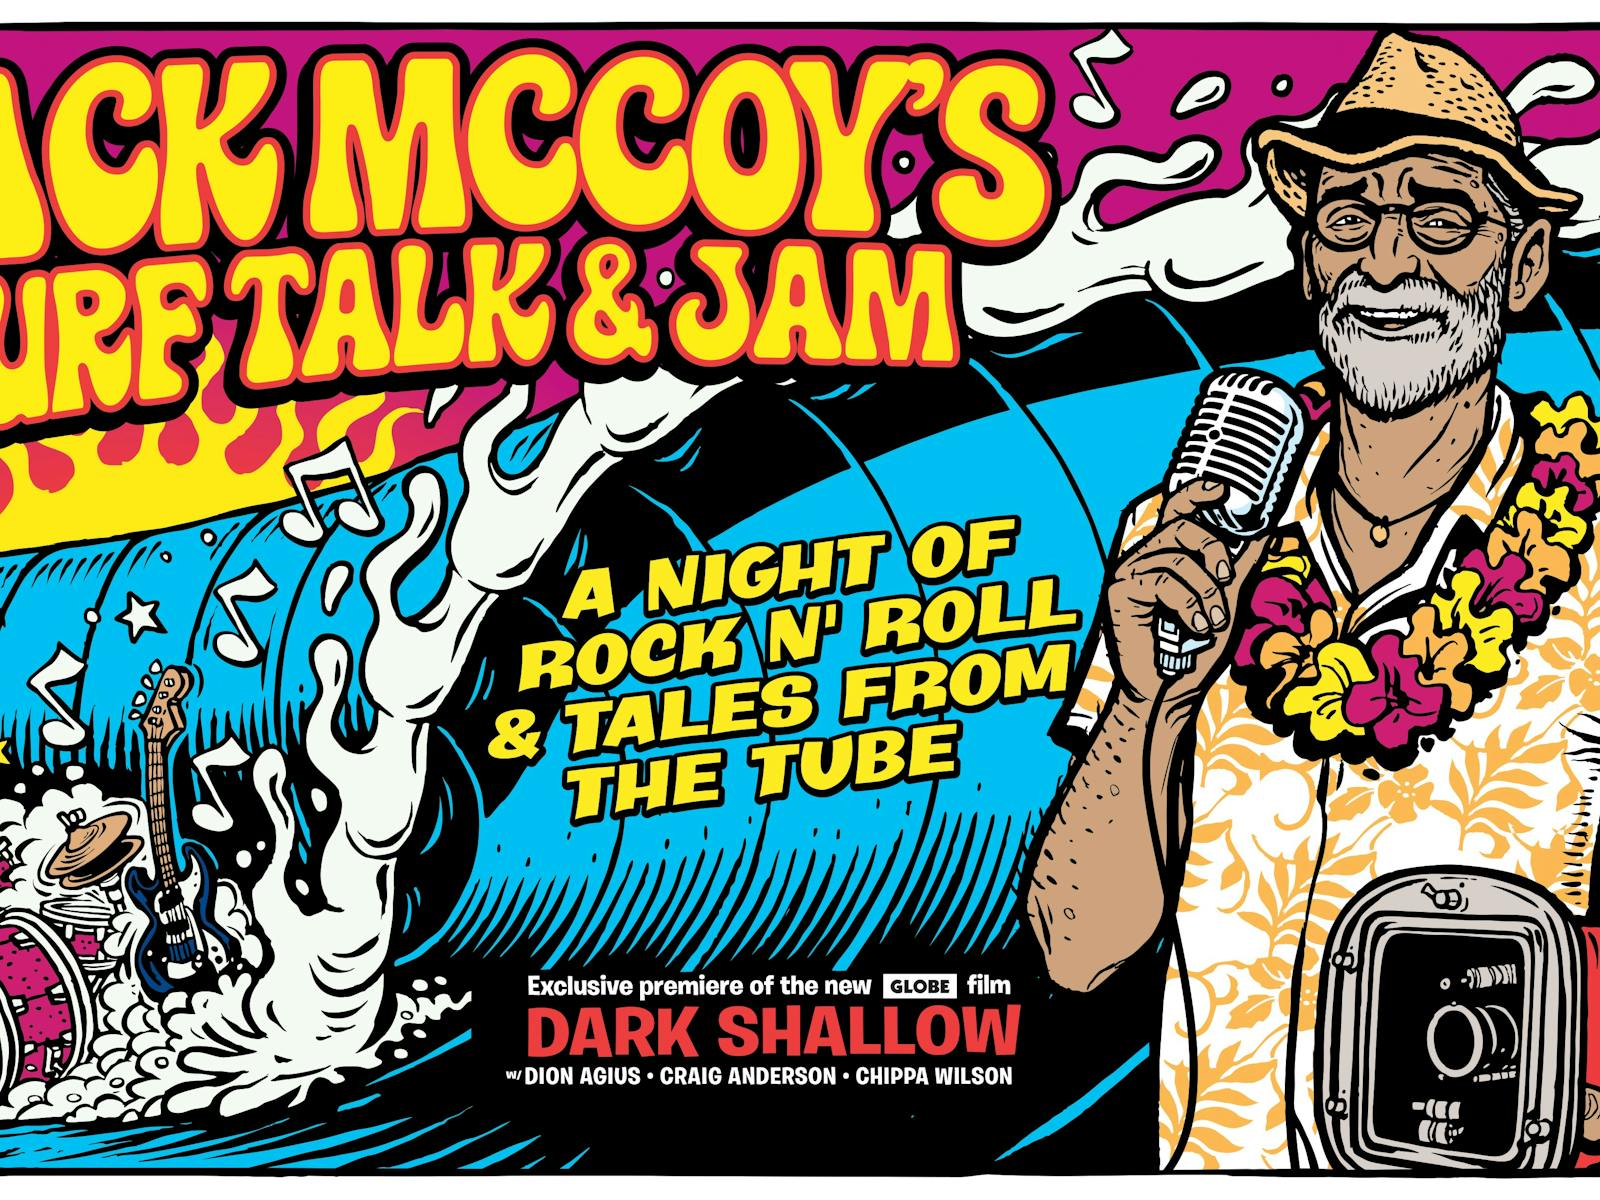 Image for Jack McCoy Surf Talk and Jam - Dee Why RSL